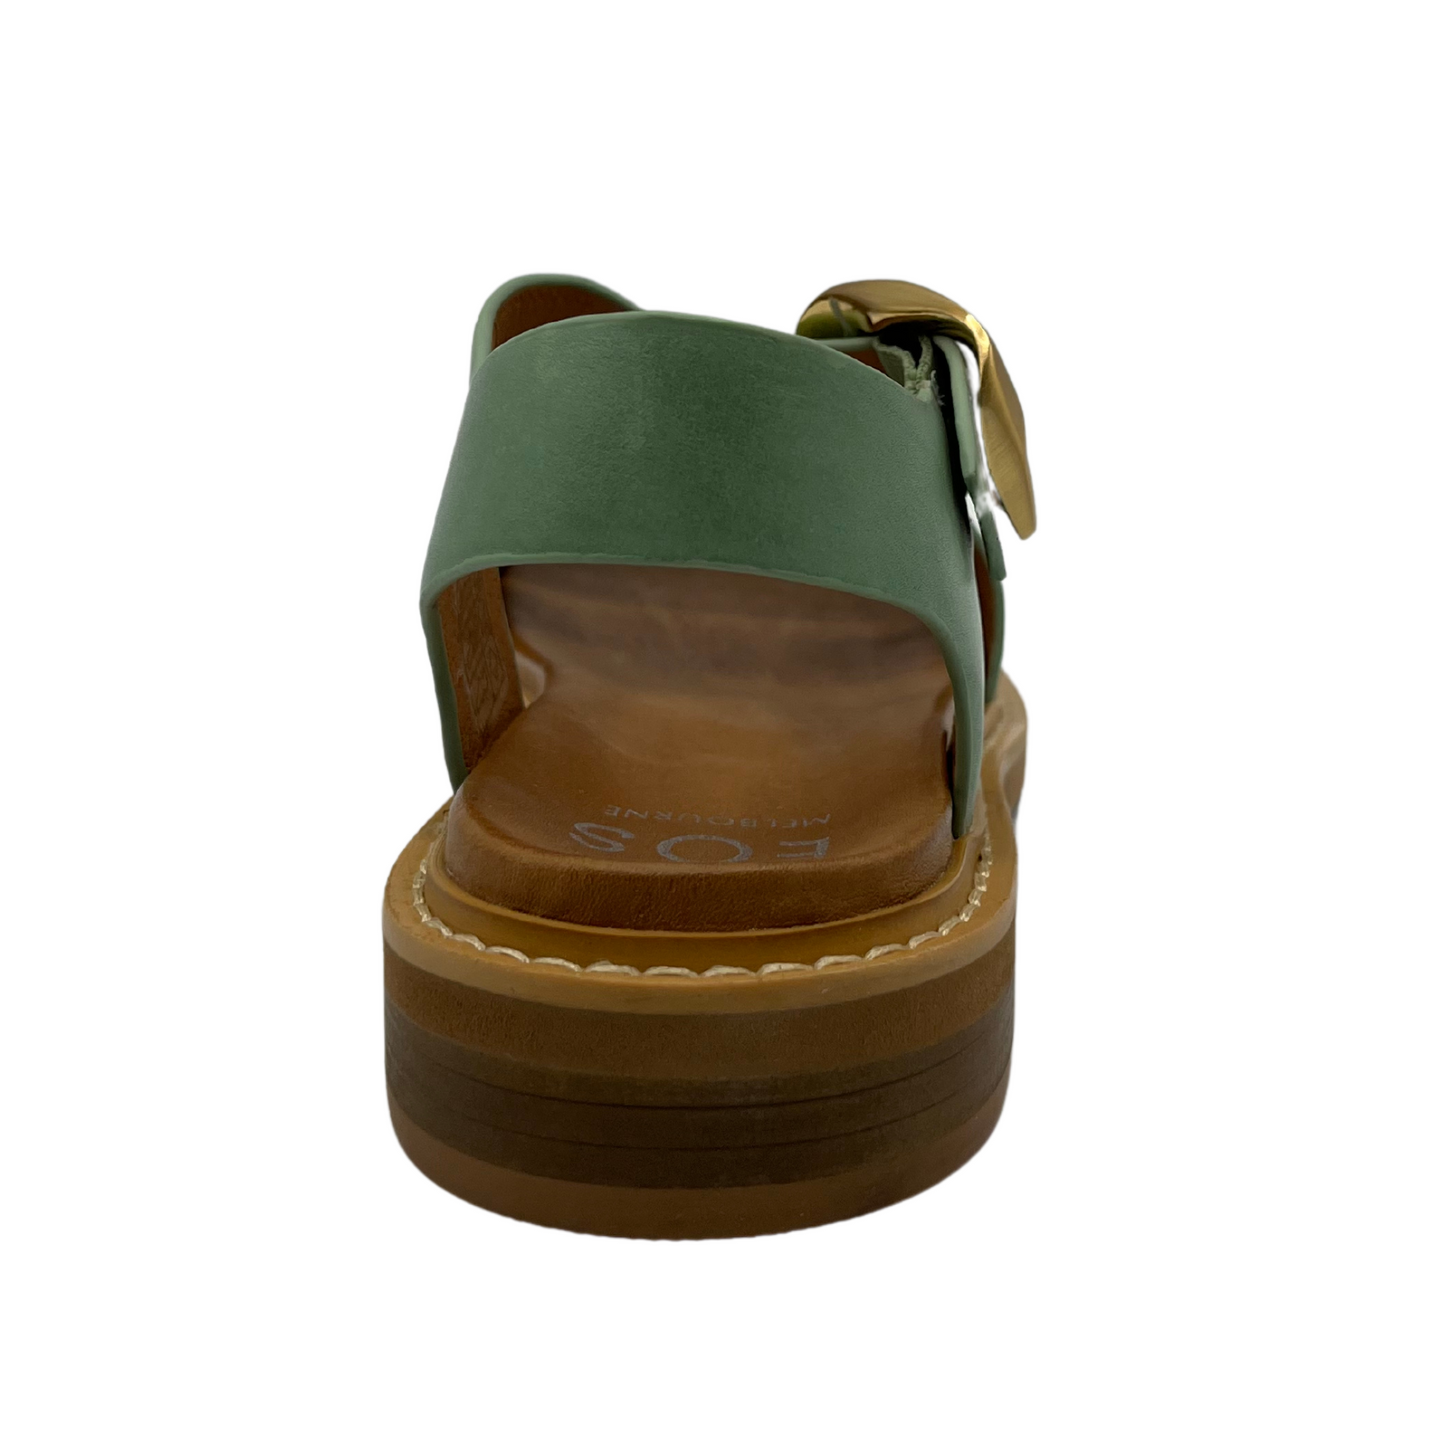 Back view of green leather sandal with gold buckle closure and low heel